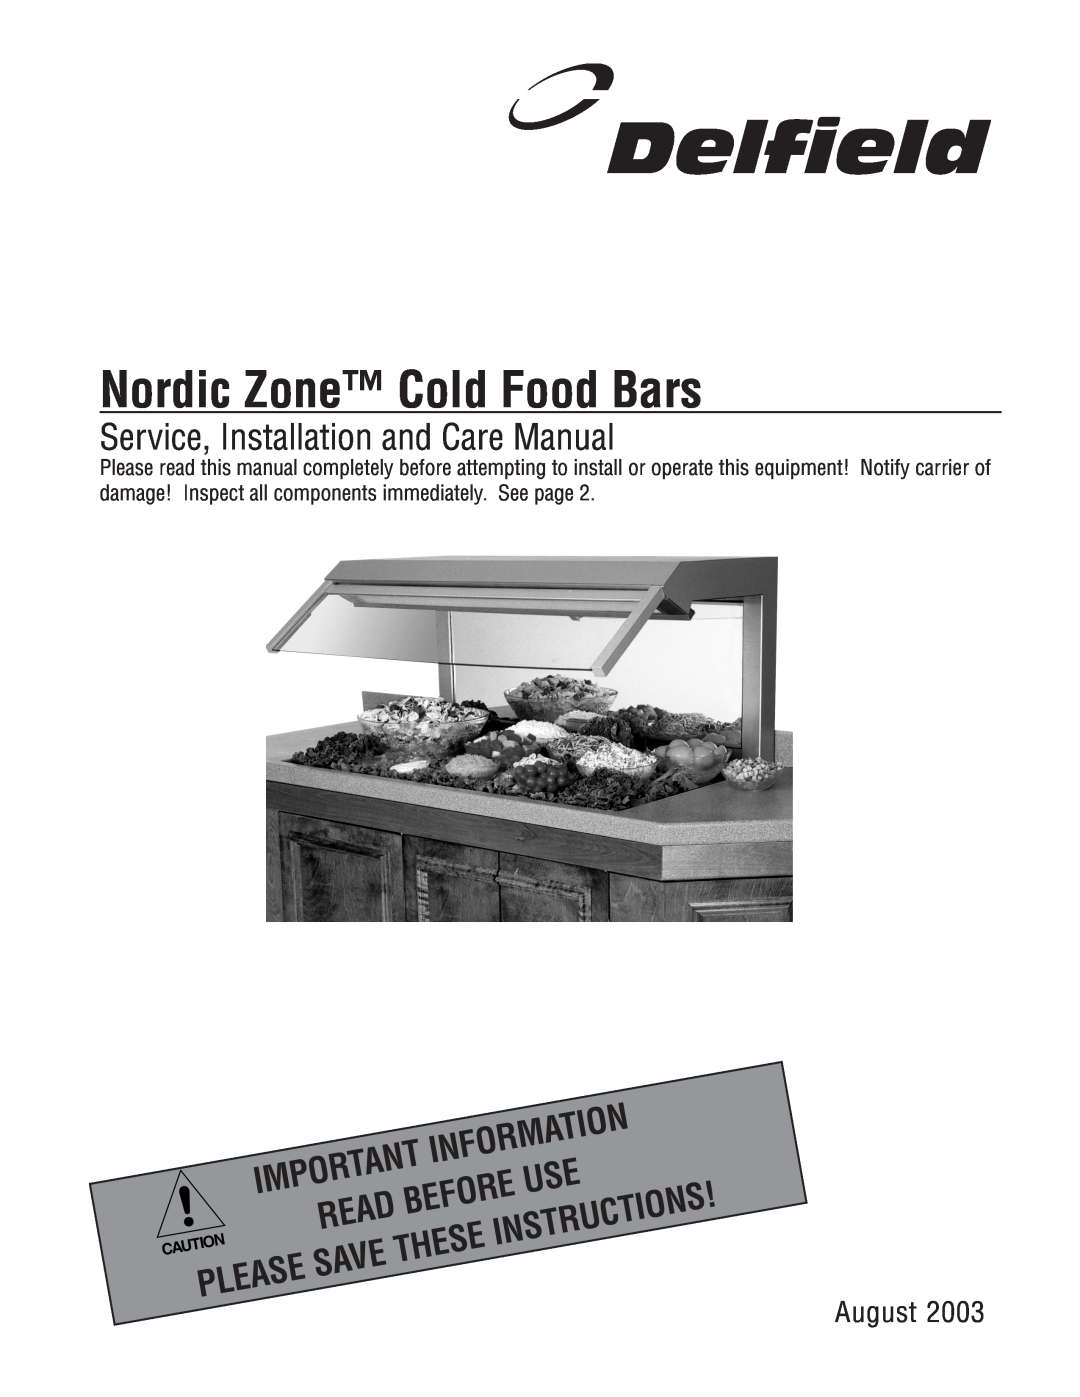 Delfield manual Nordic Zone Cold Food Bars, Service, Installation and Care Manual, Information, Read, Save, Please 